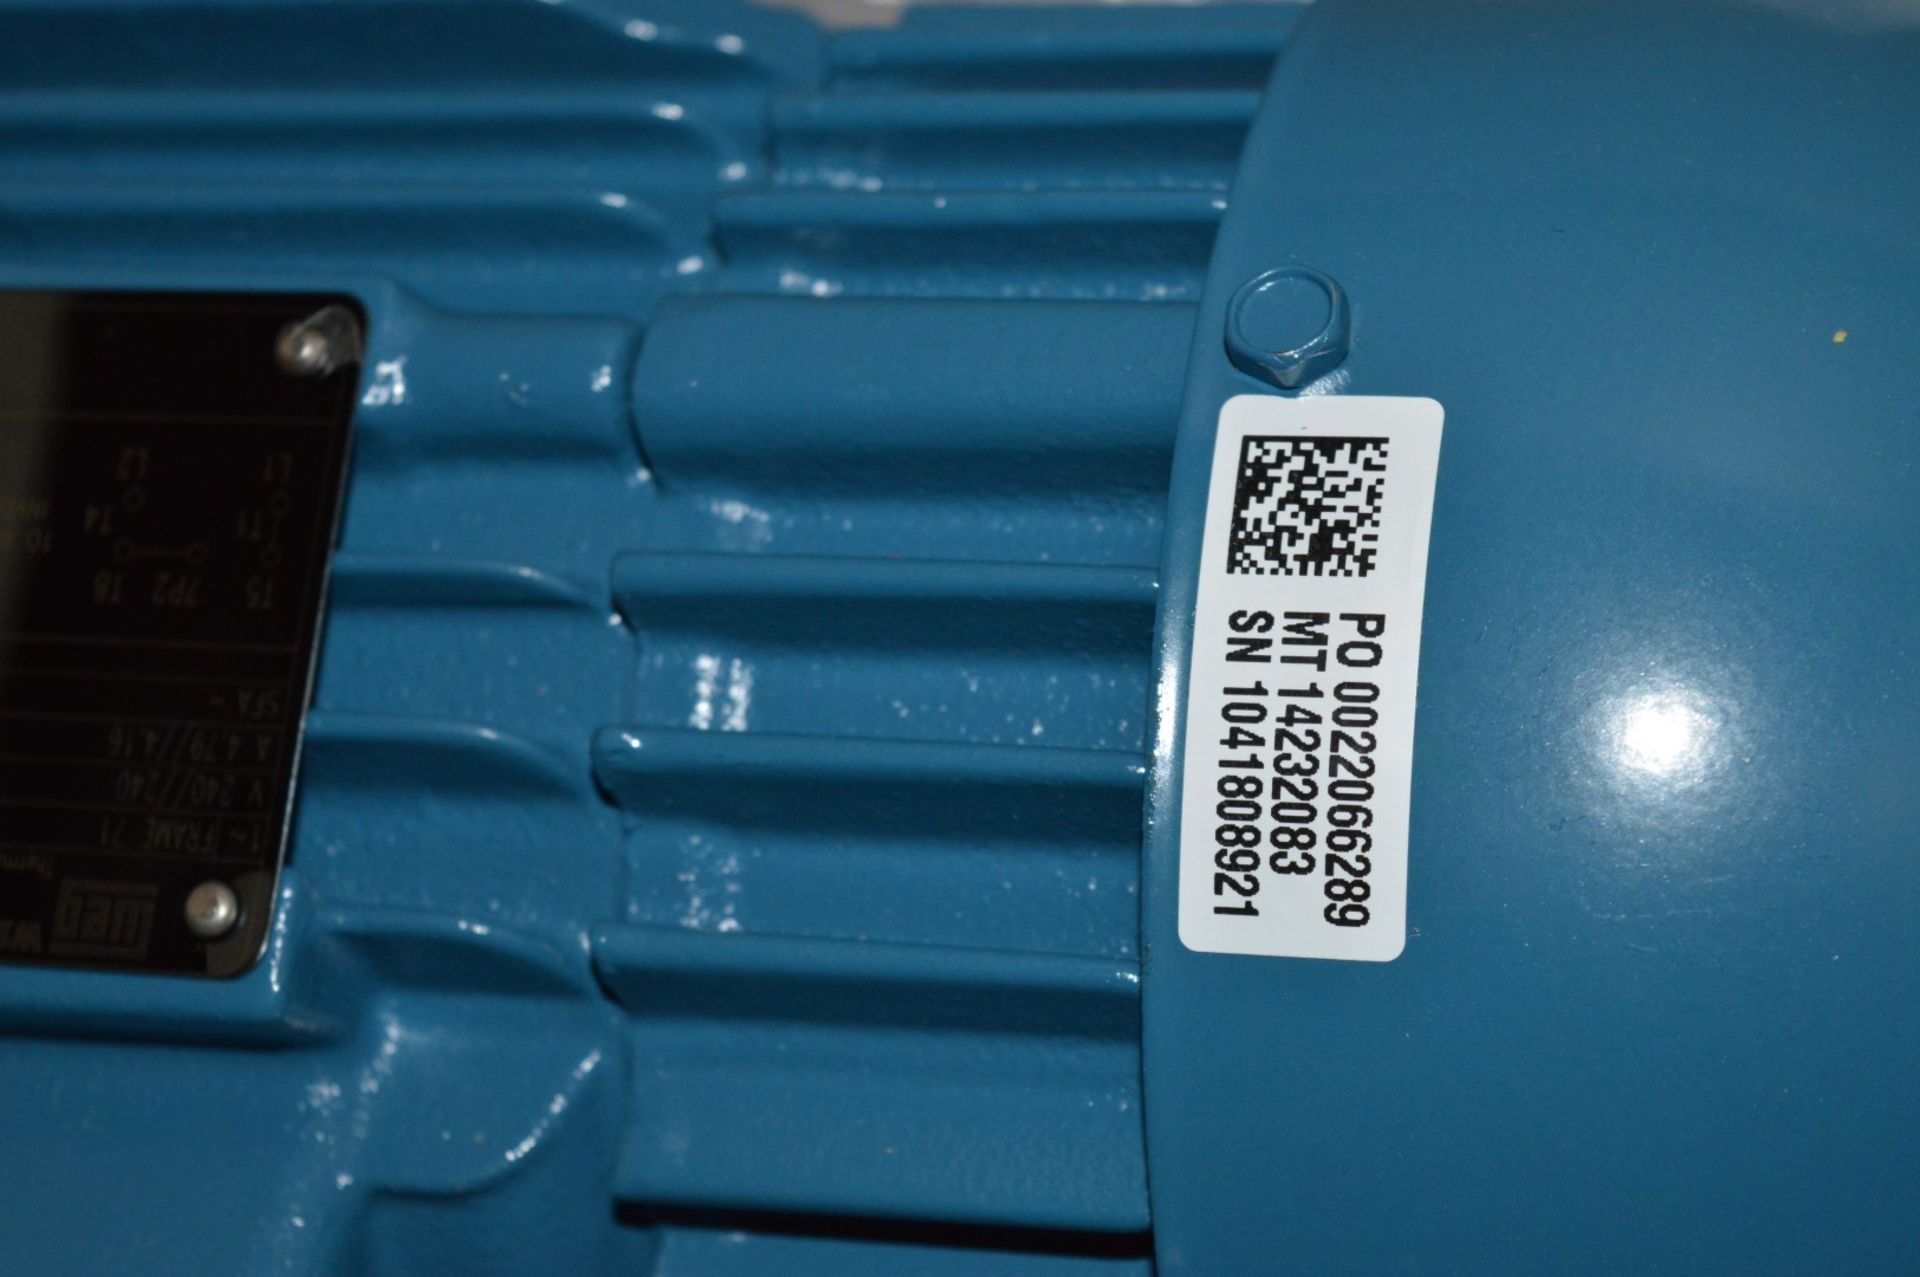 1 x Weg W22 240v IP55 Single Phase Electric Motor - New and Boxed - CL295 - Location: Altrincham - Image 2 of 8